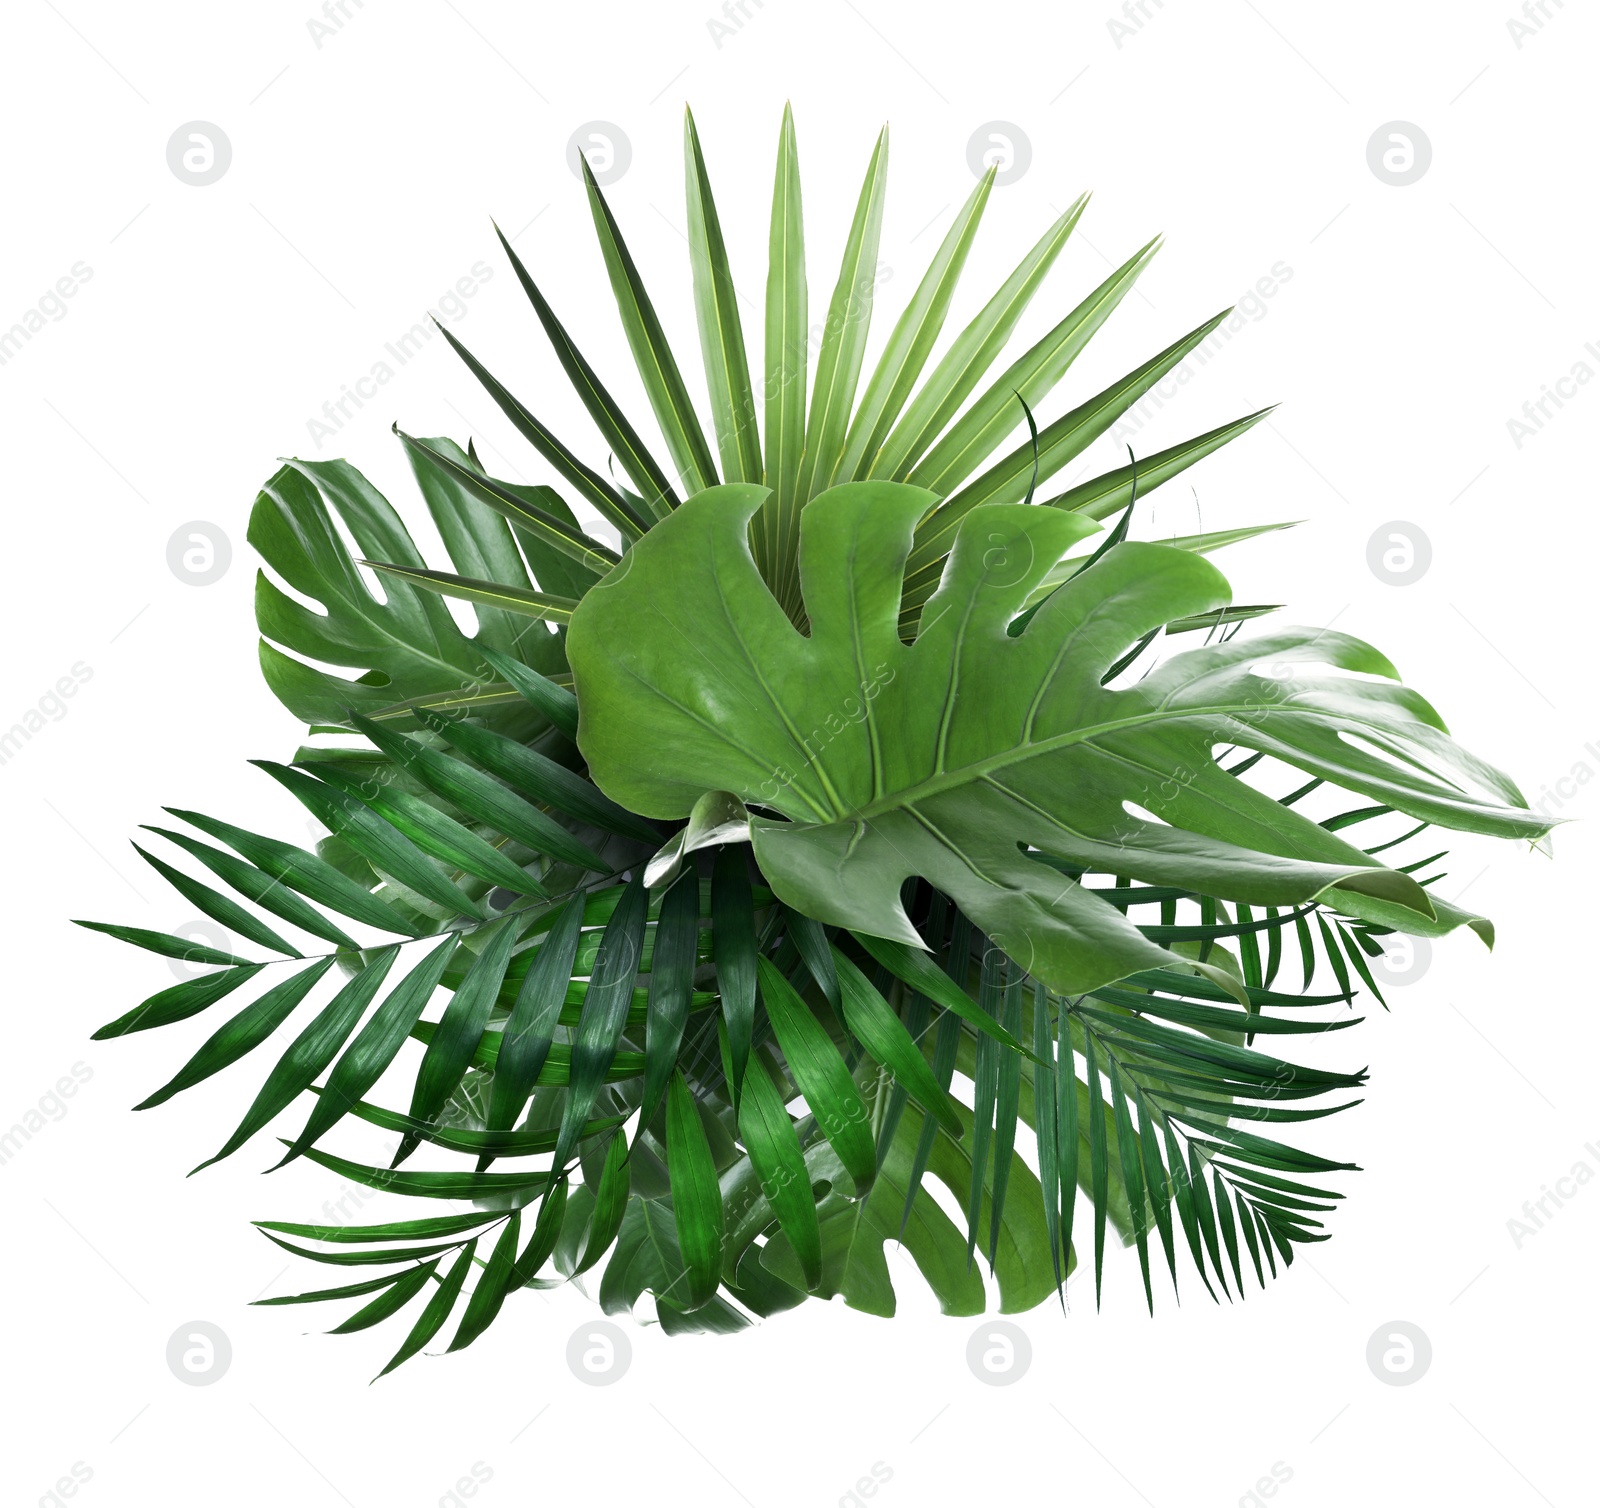 Image of Different fresh tropical leaves on white background